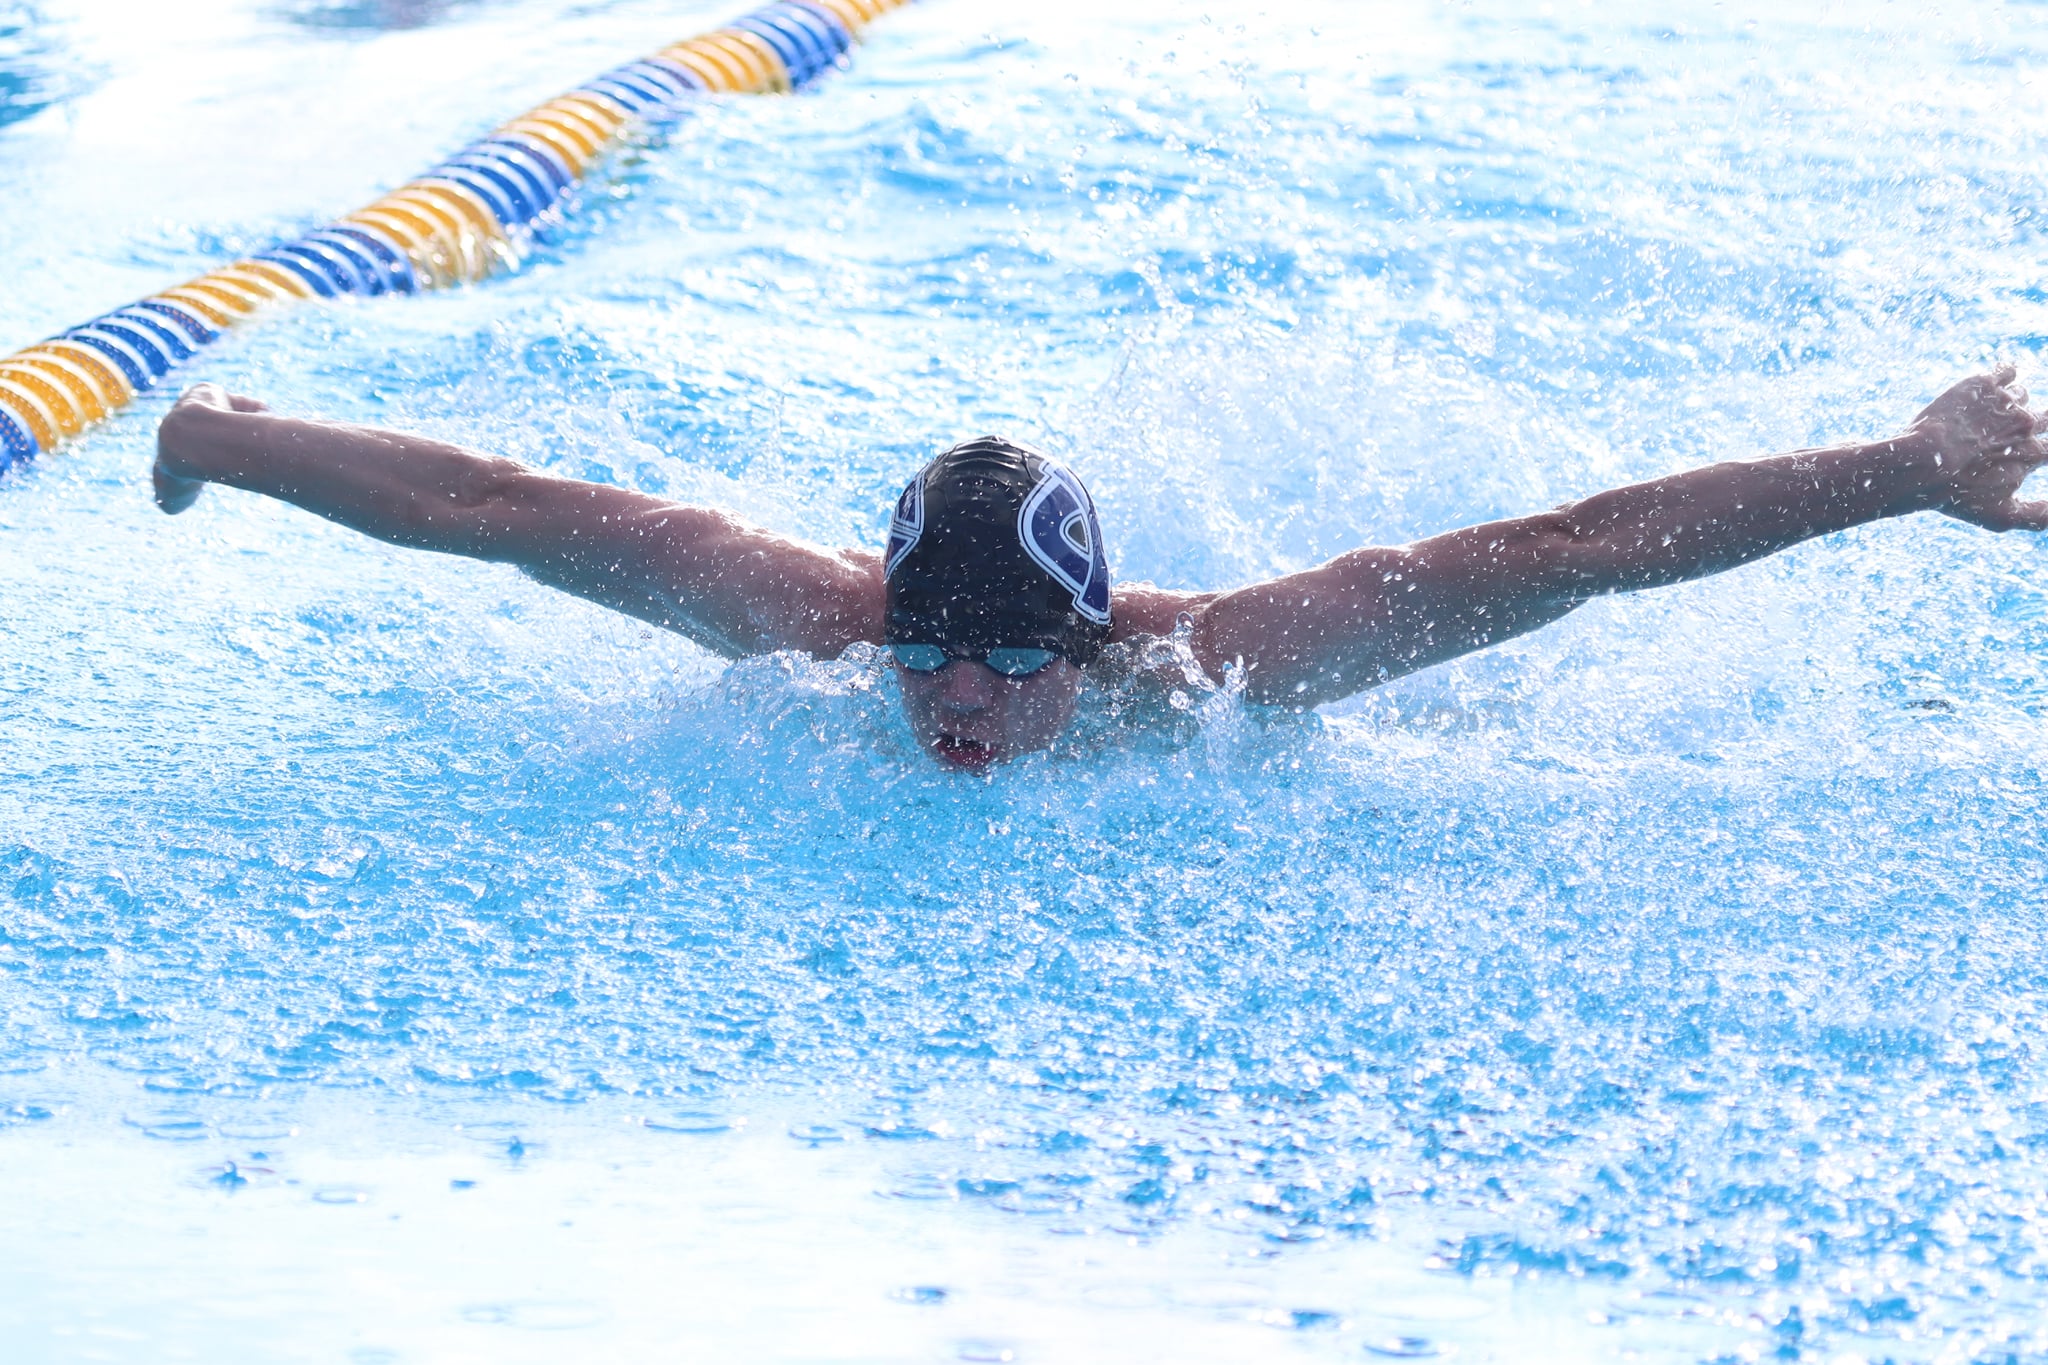 Tritons place second at nationals